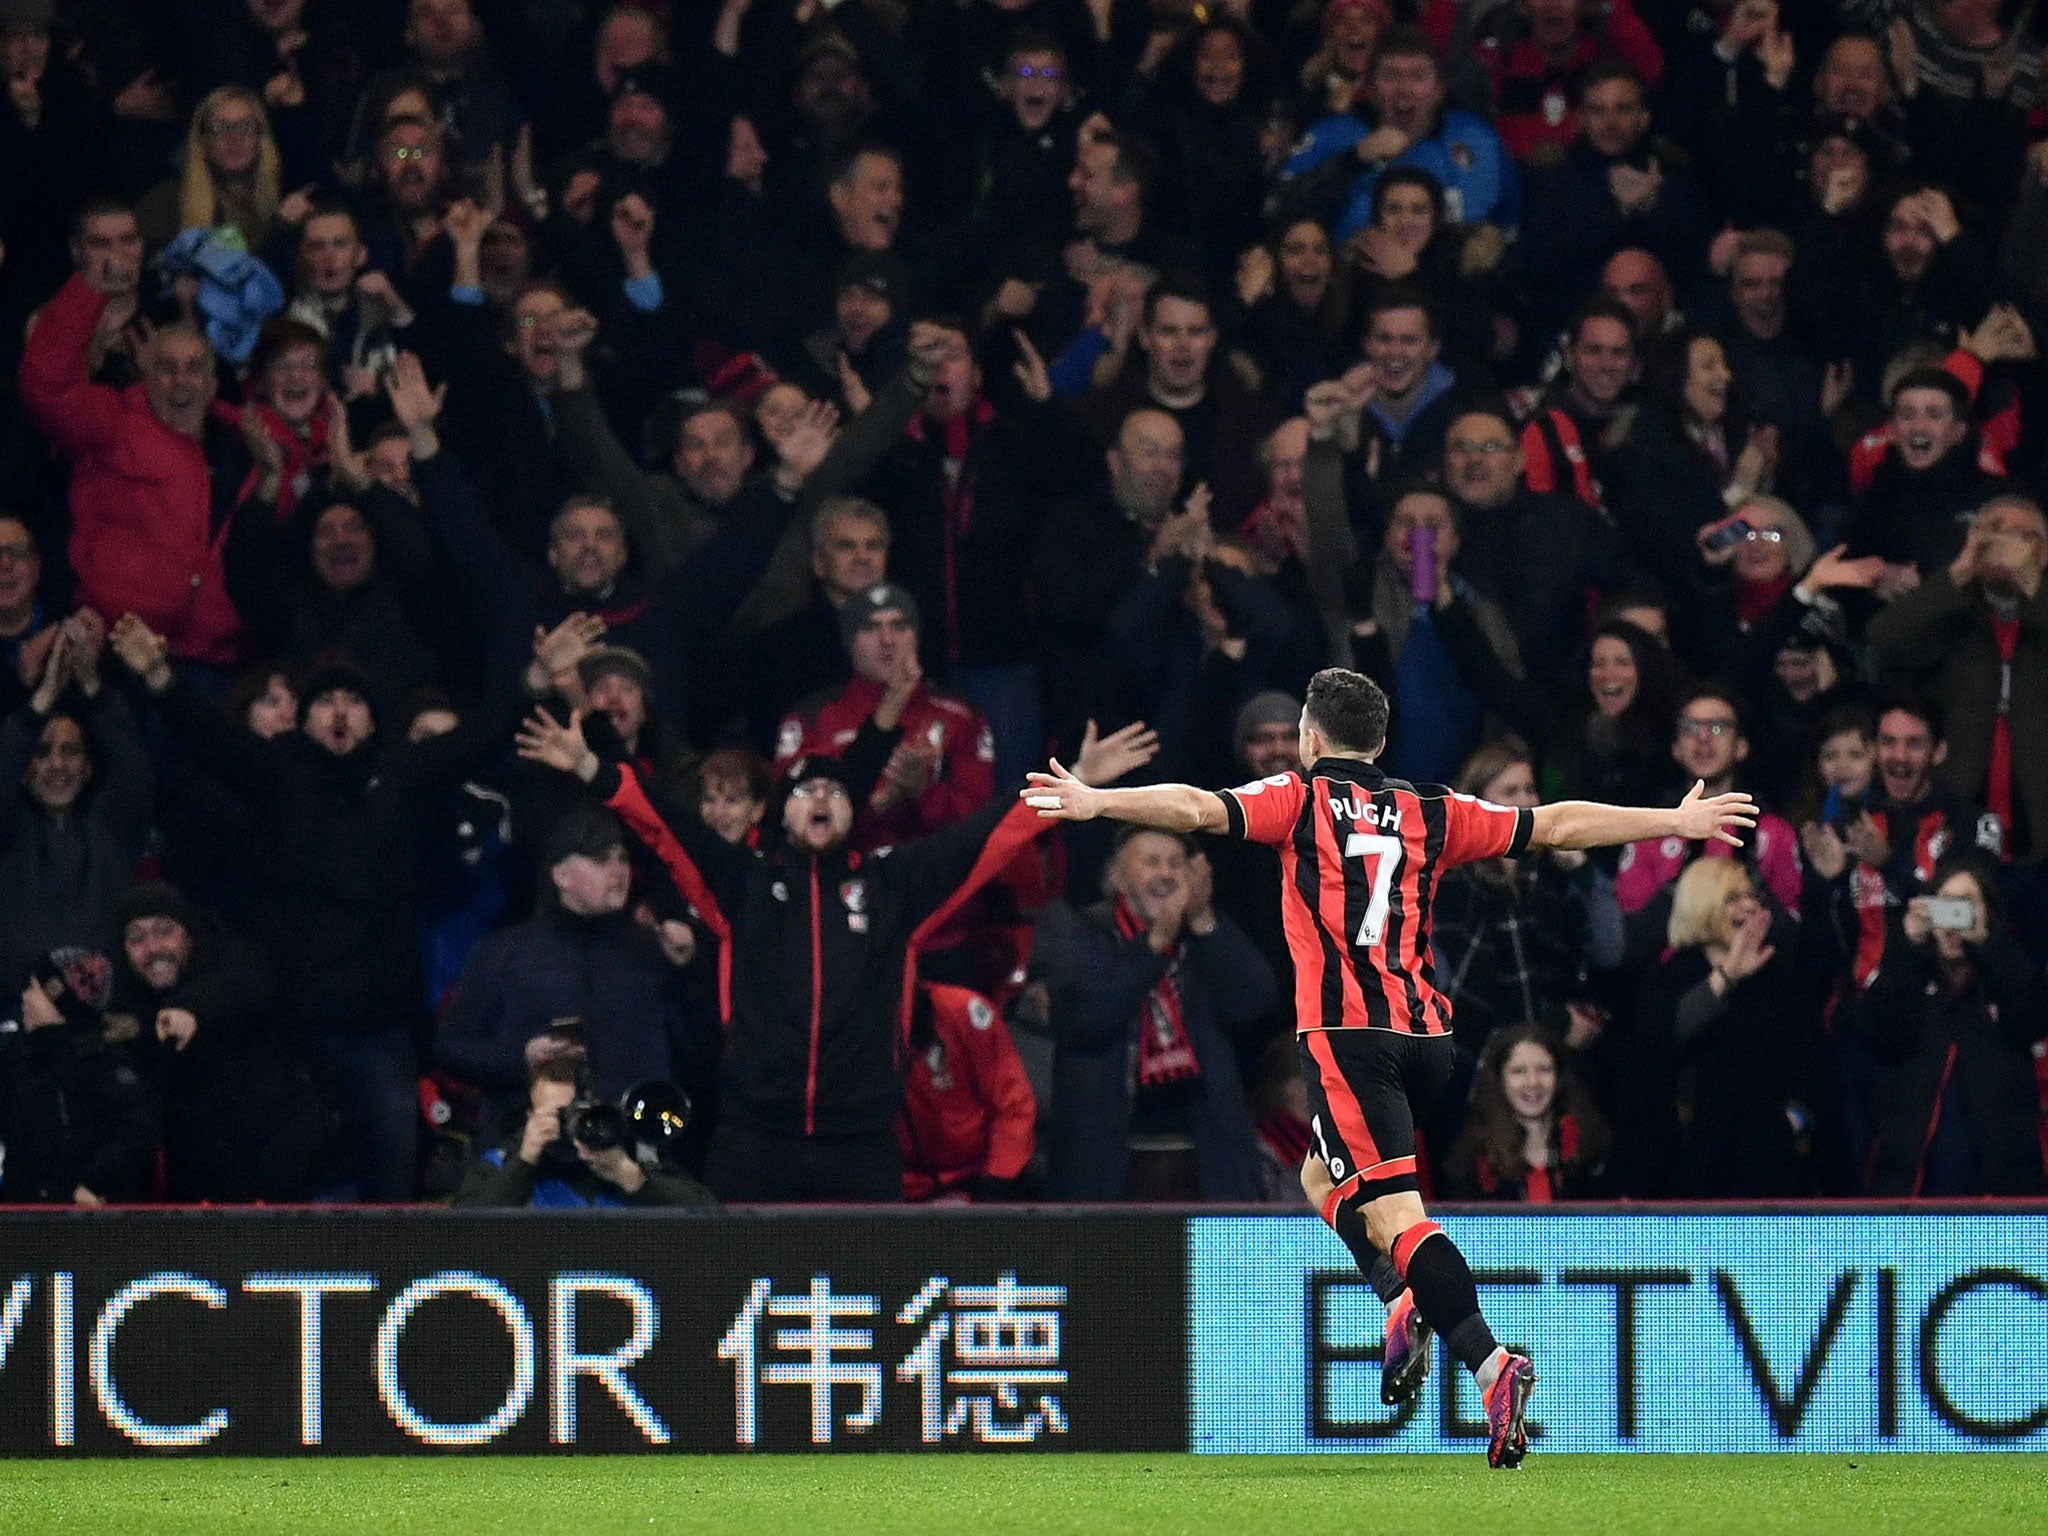 Marc Pugh celebrates his goal in front of the Bournemouth faithful